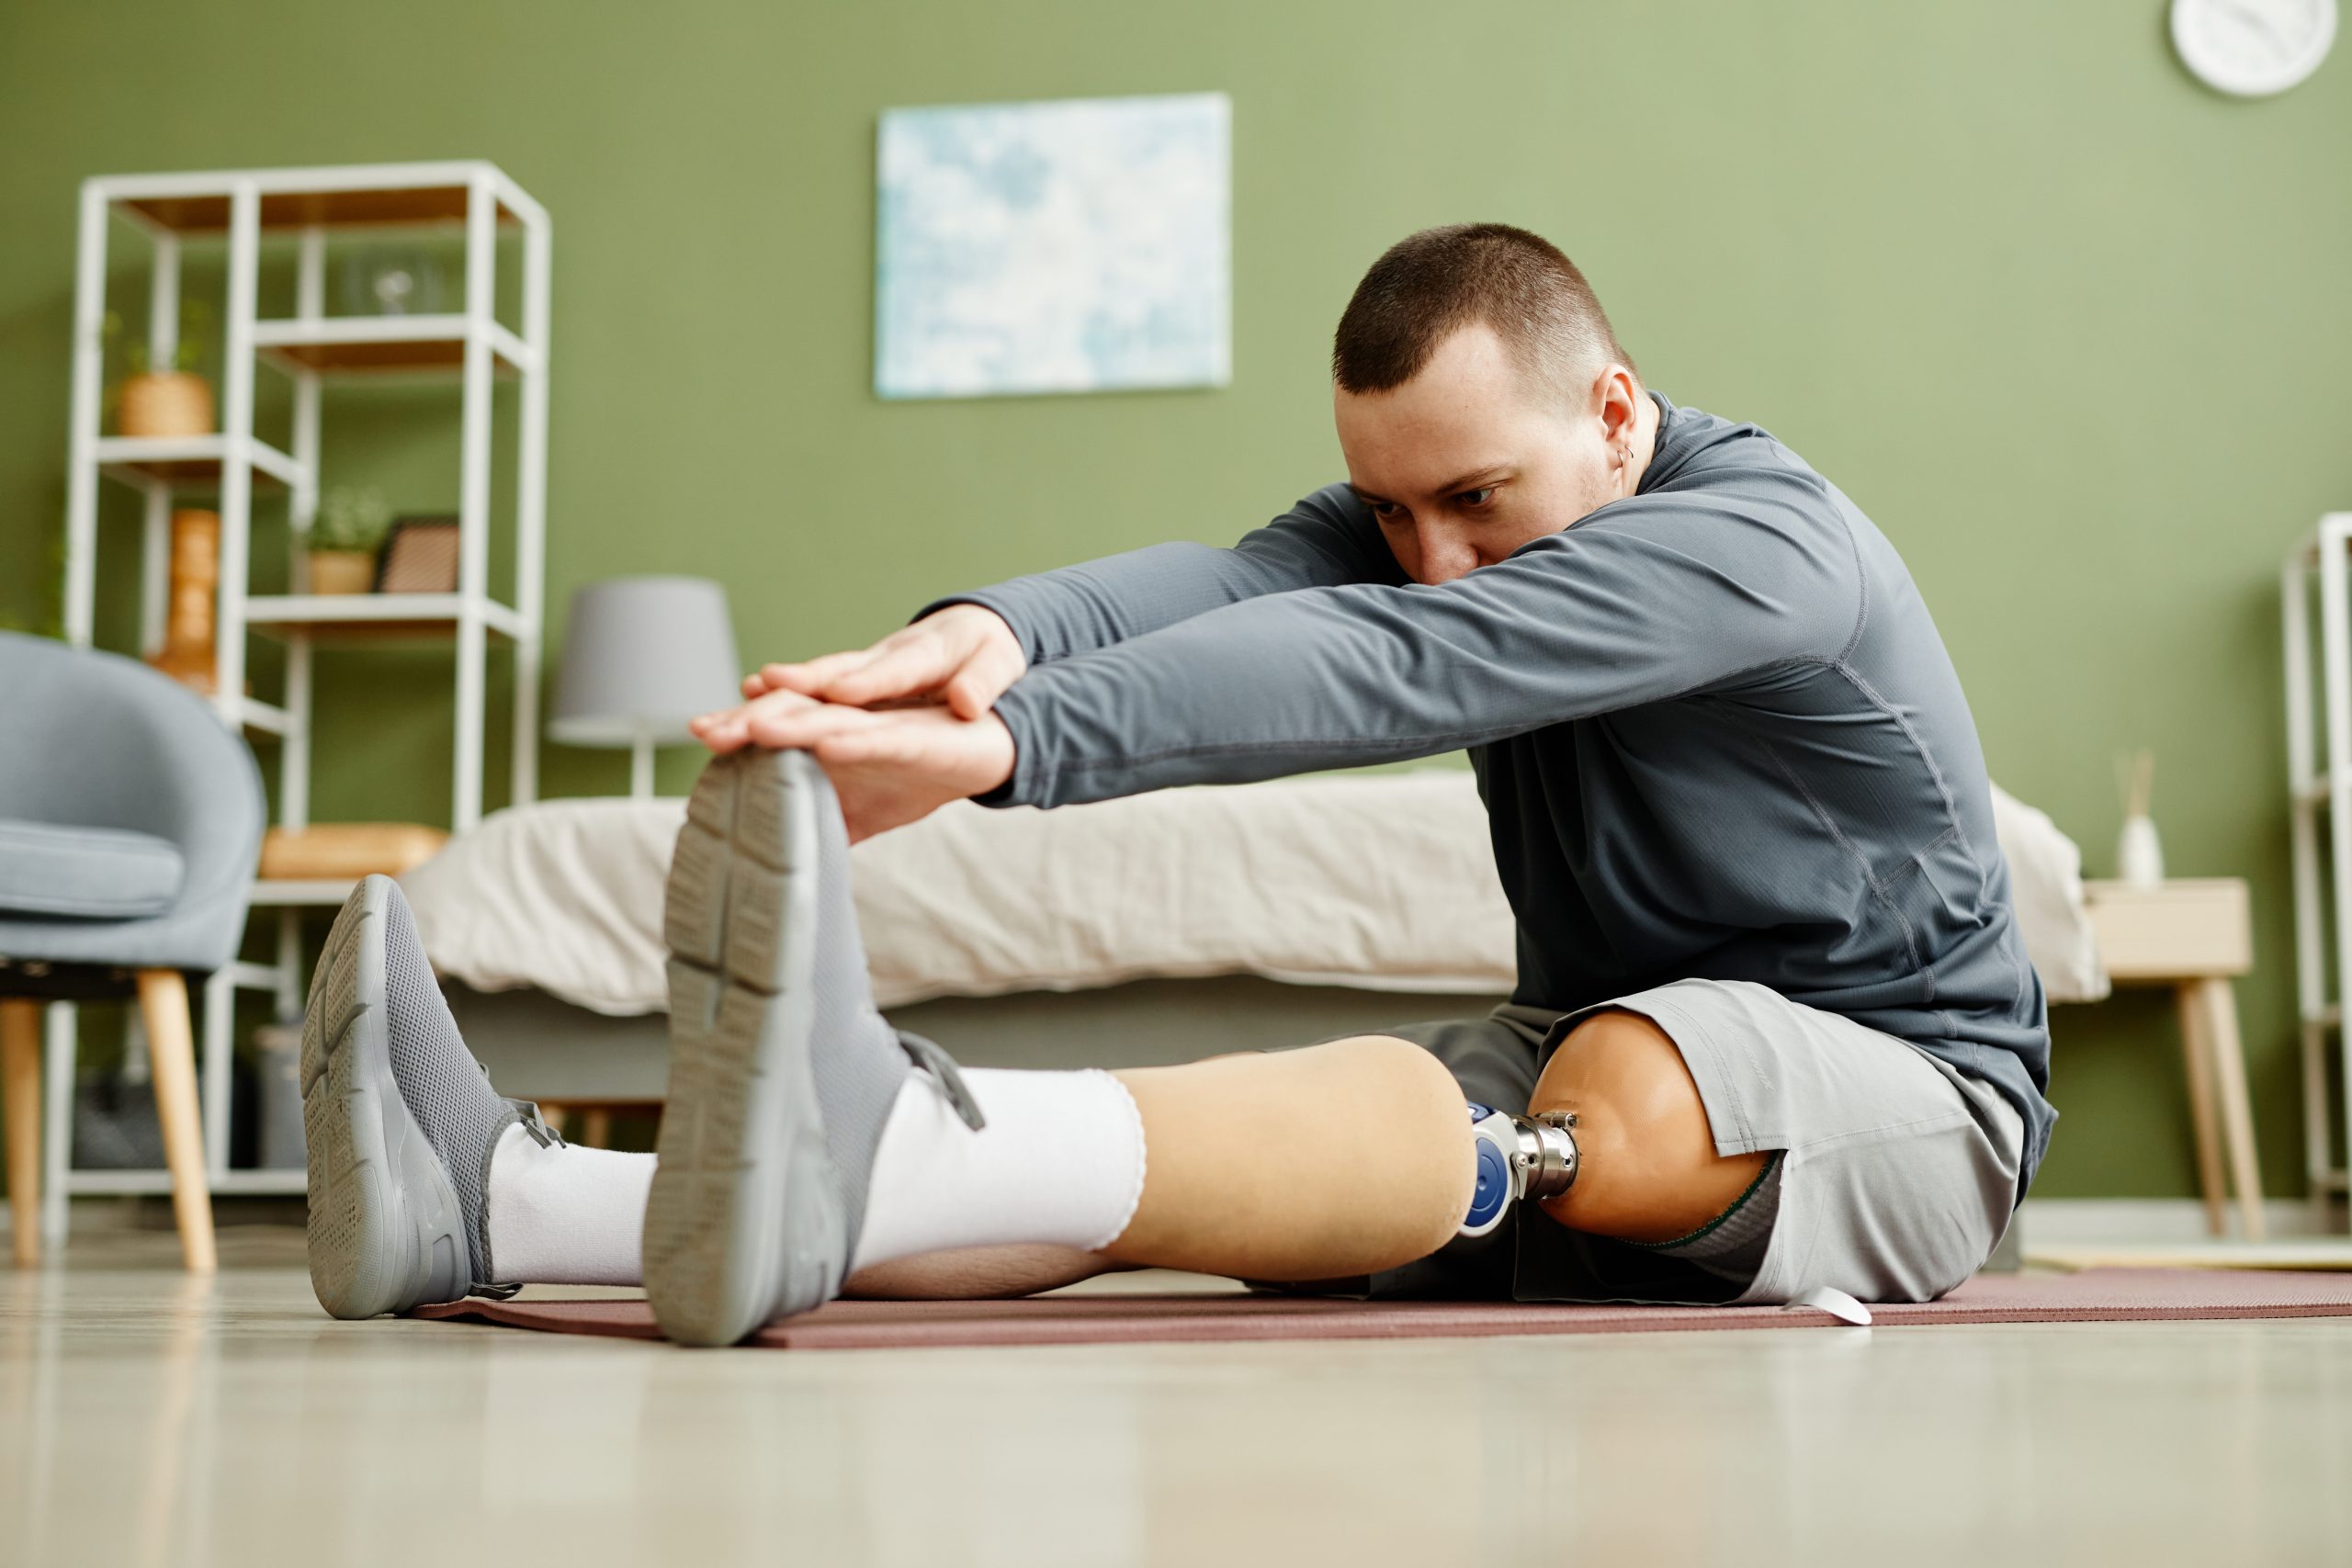 Man with a prosthetic leg, stretching and exercising